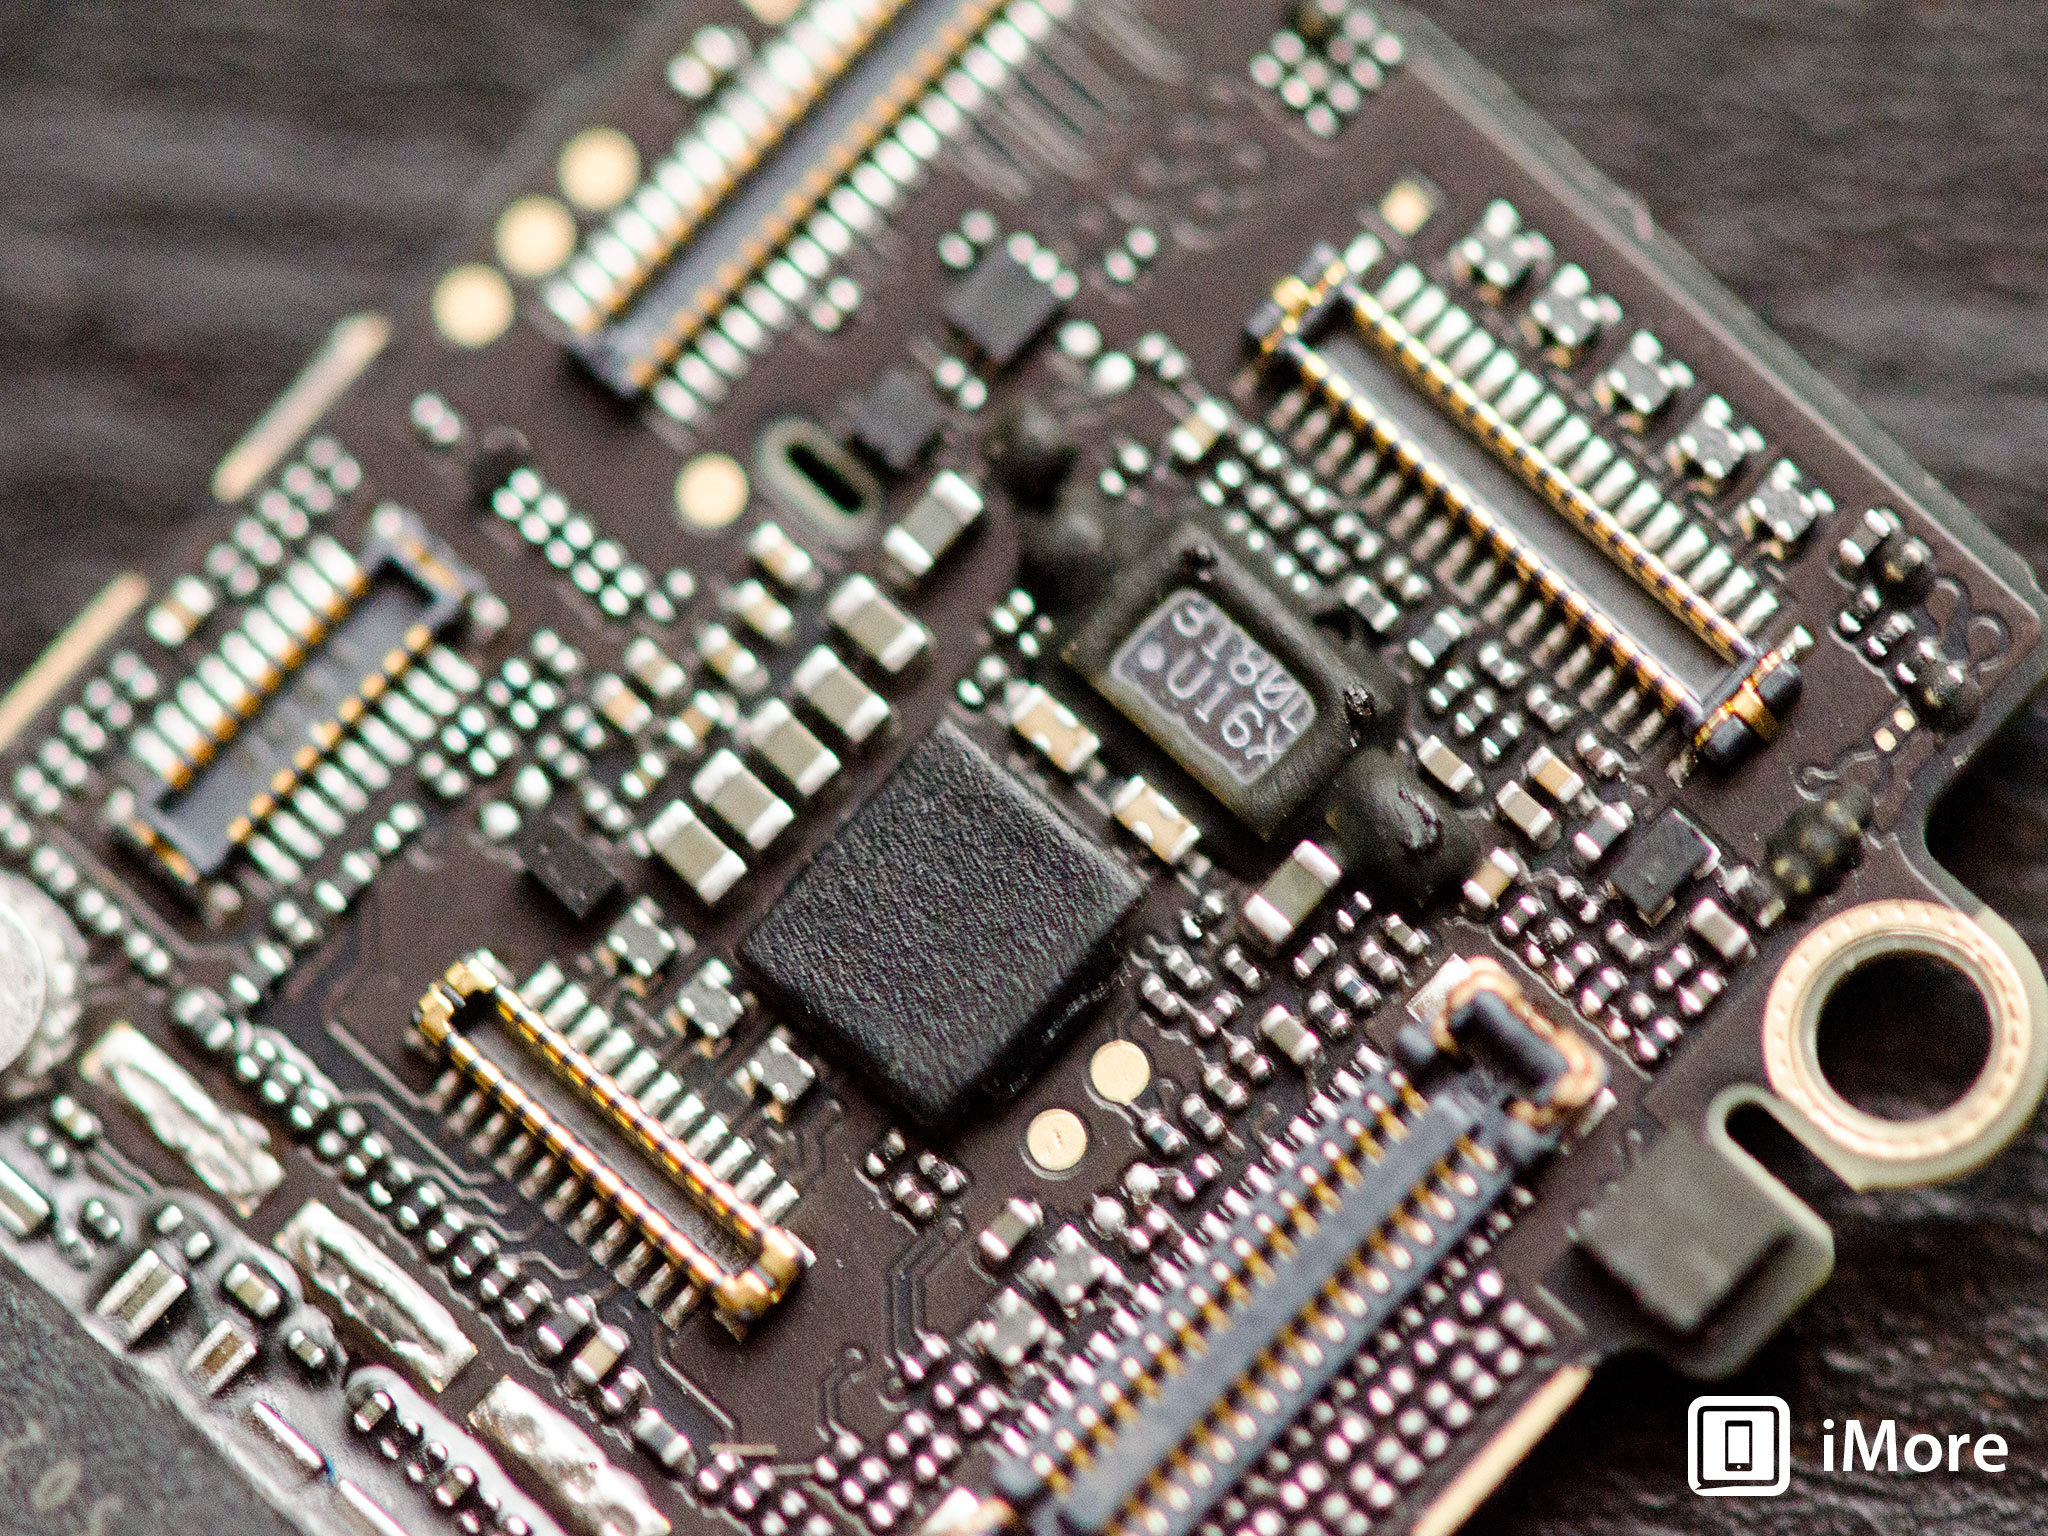 A look at the top of the board. See that middle chipset there? That's the M7!